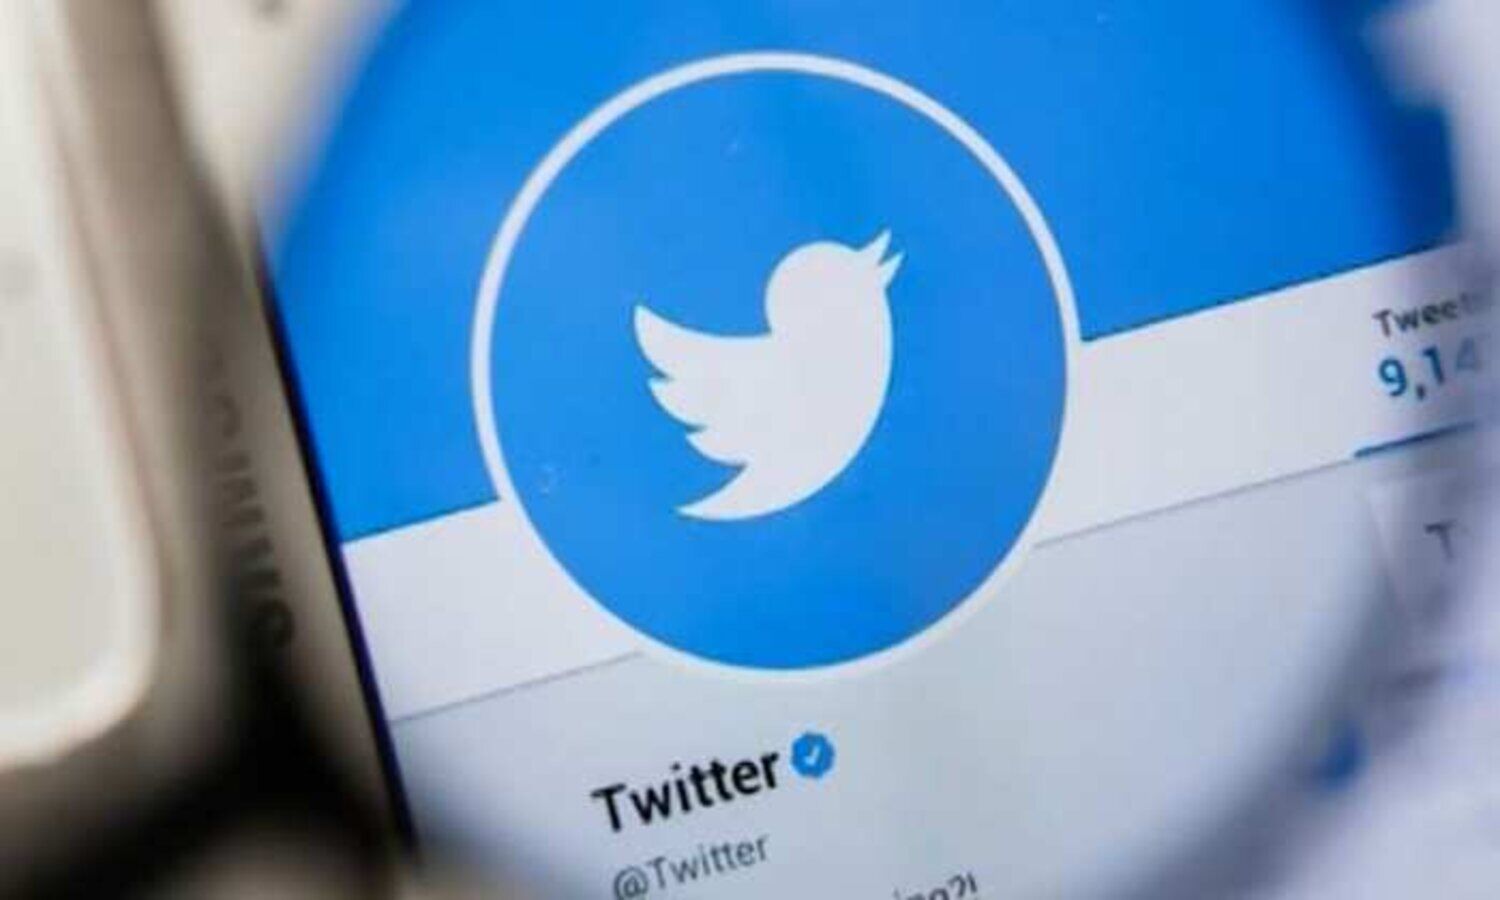 Twitter Blue Tick Price: Twitter’s big move against Apple, these users got angry